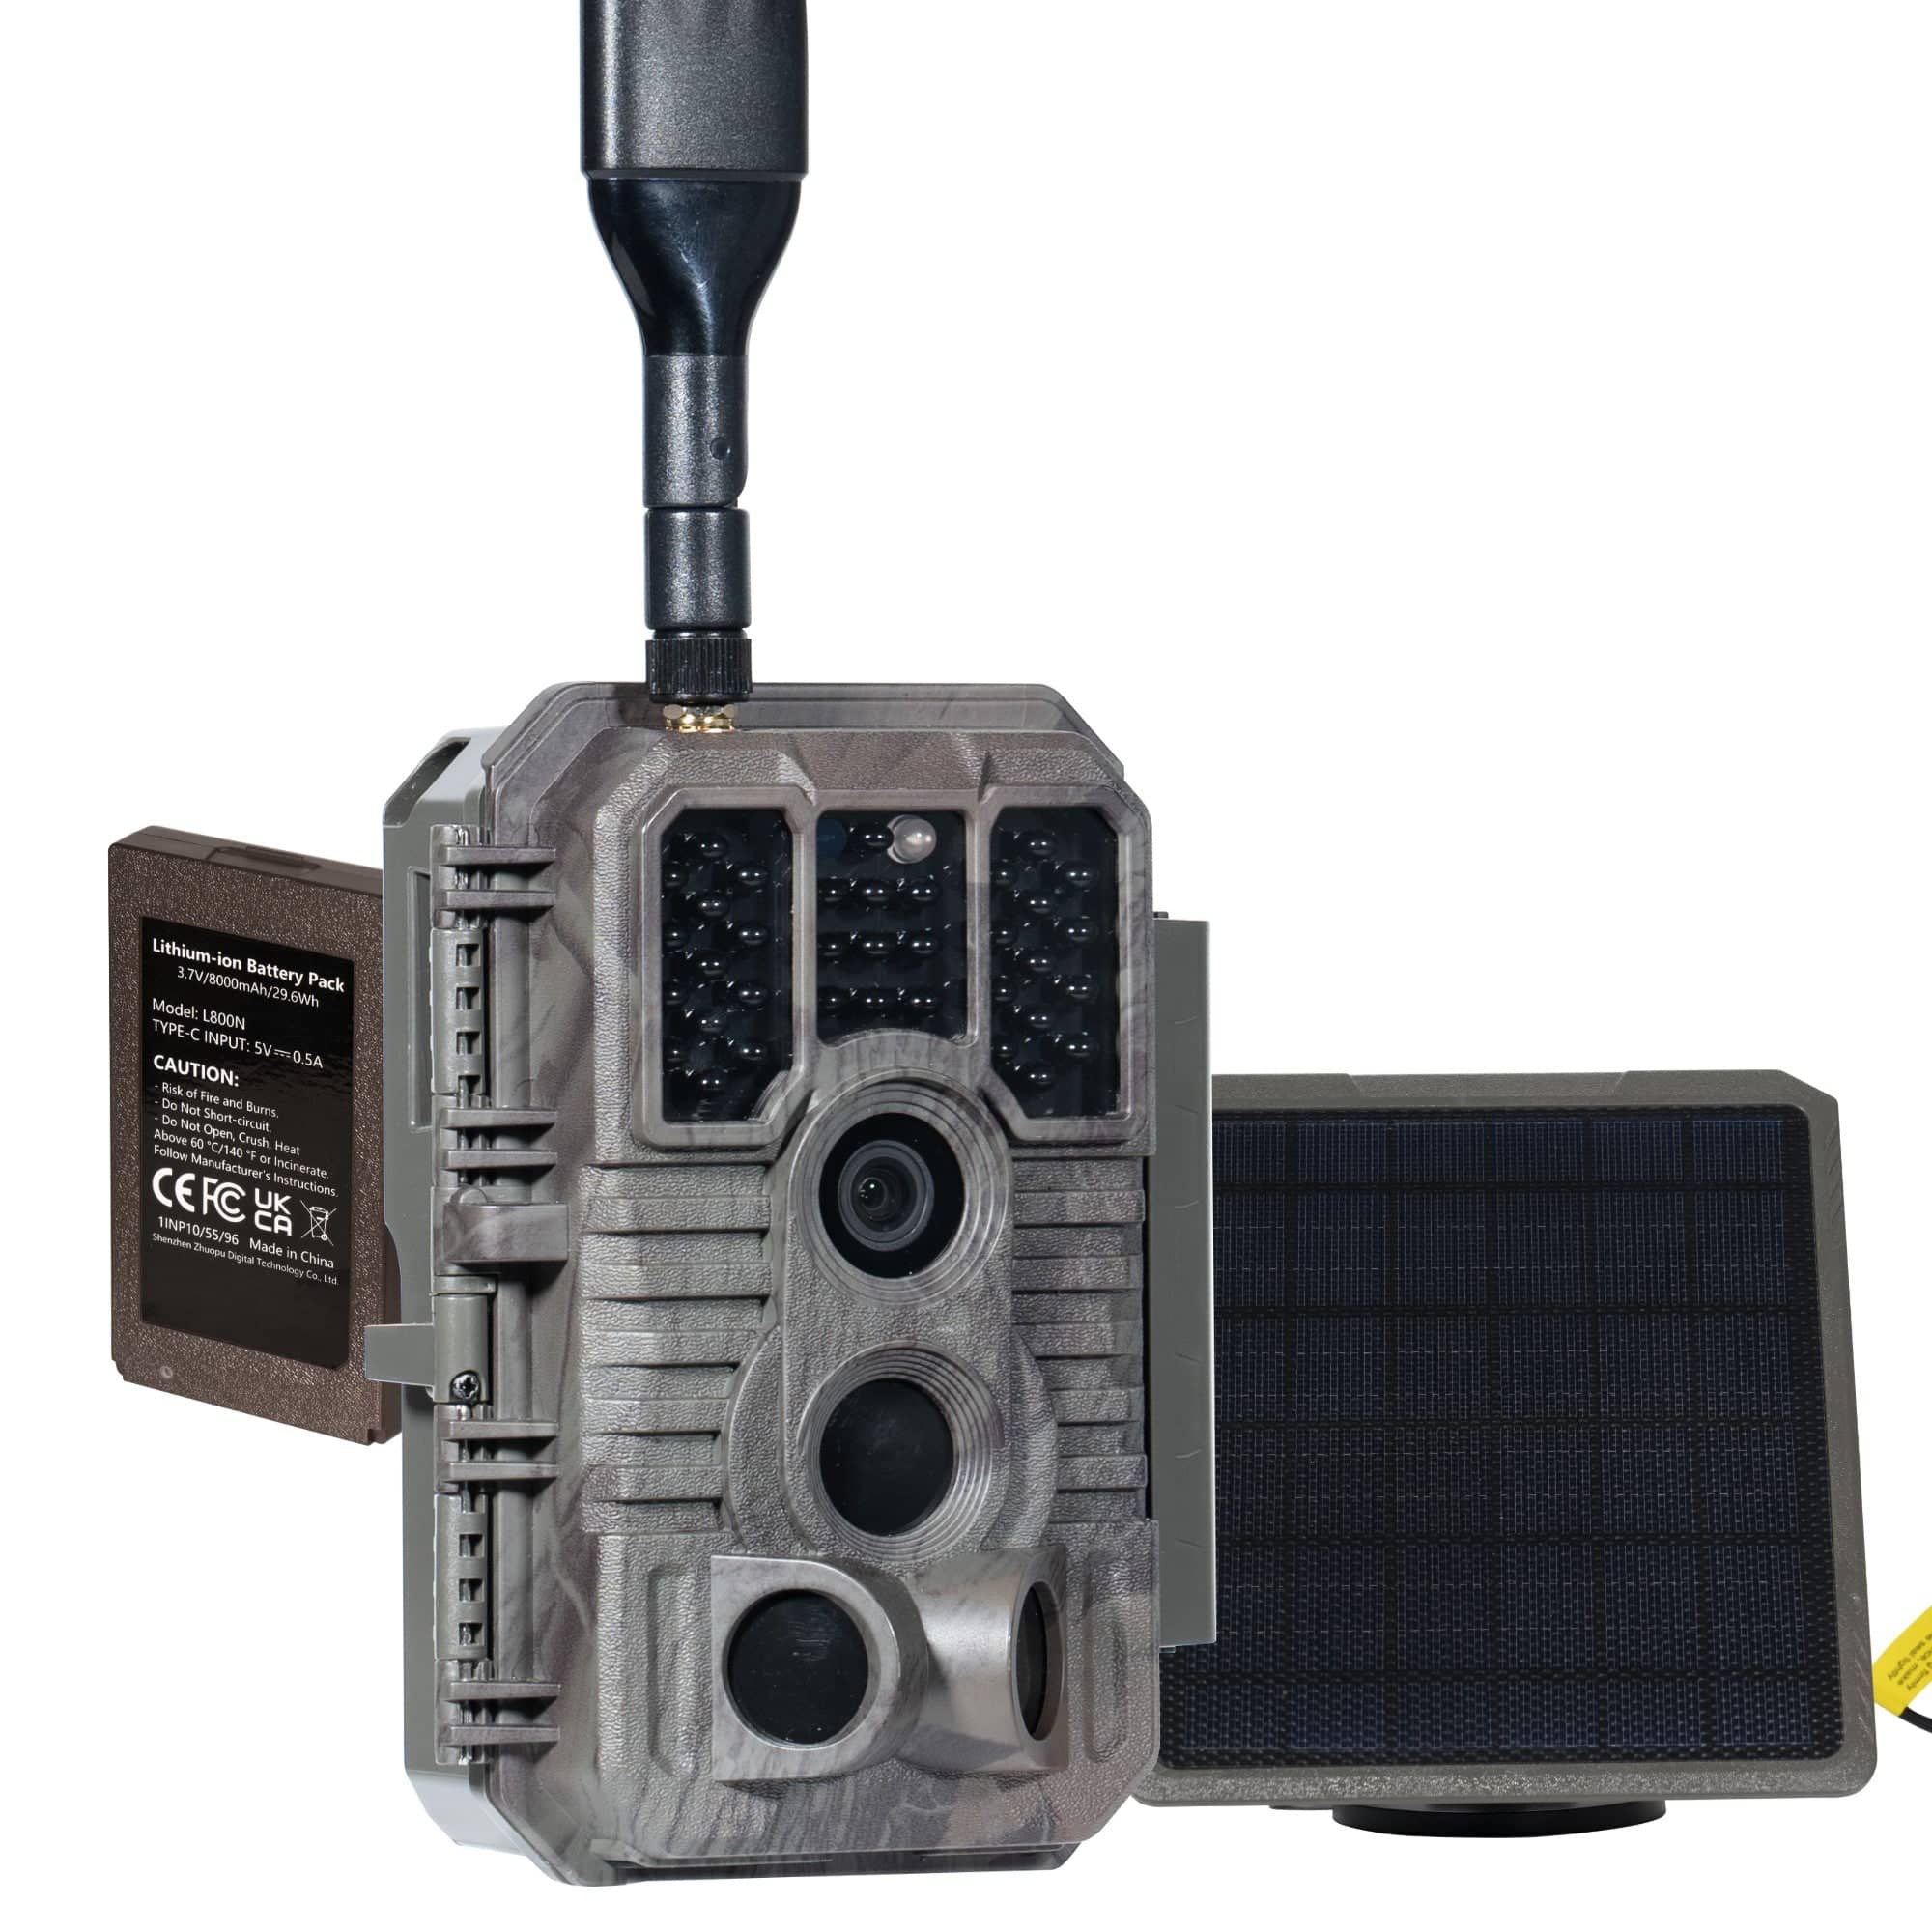 GardePro Cellular Trail Camera X60P Pre-Installed Contract SIM With Rechargeable Battery & Solar Panel